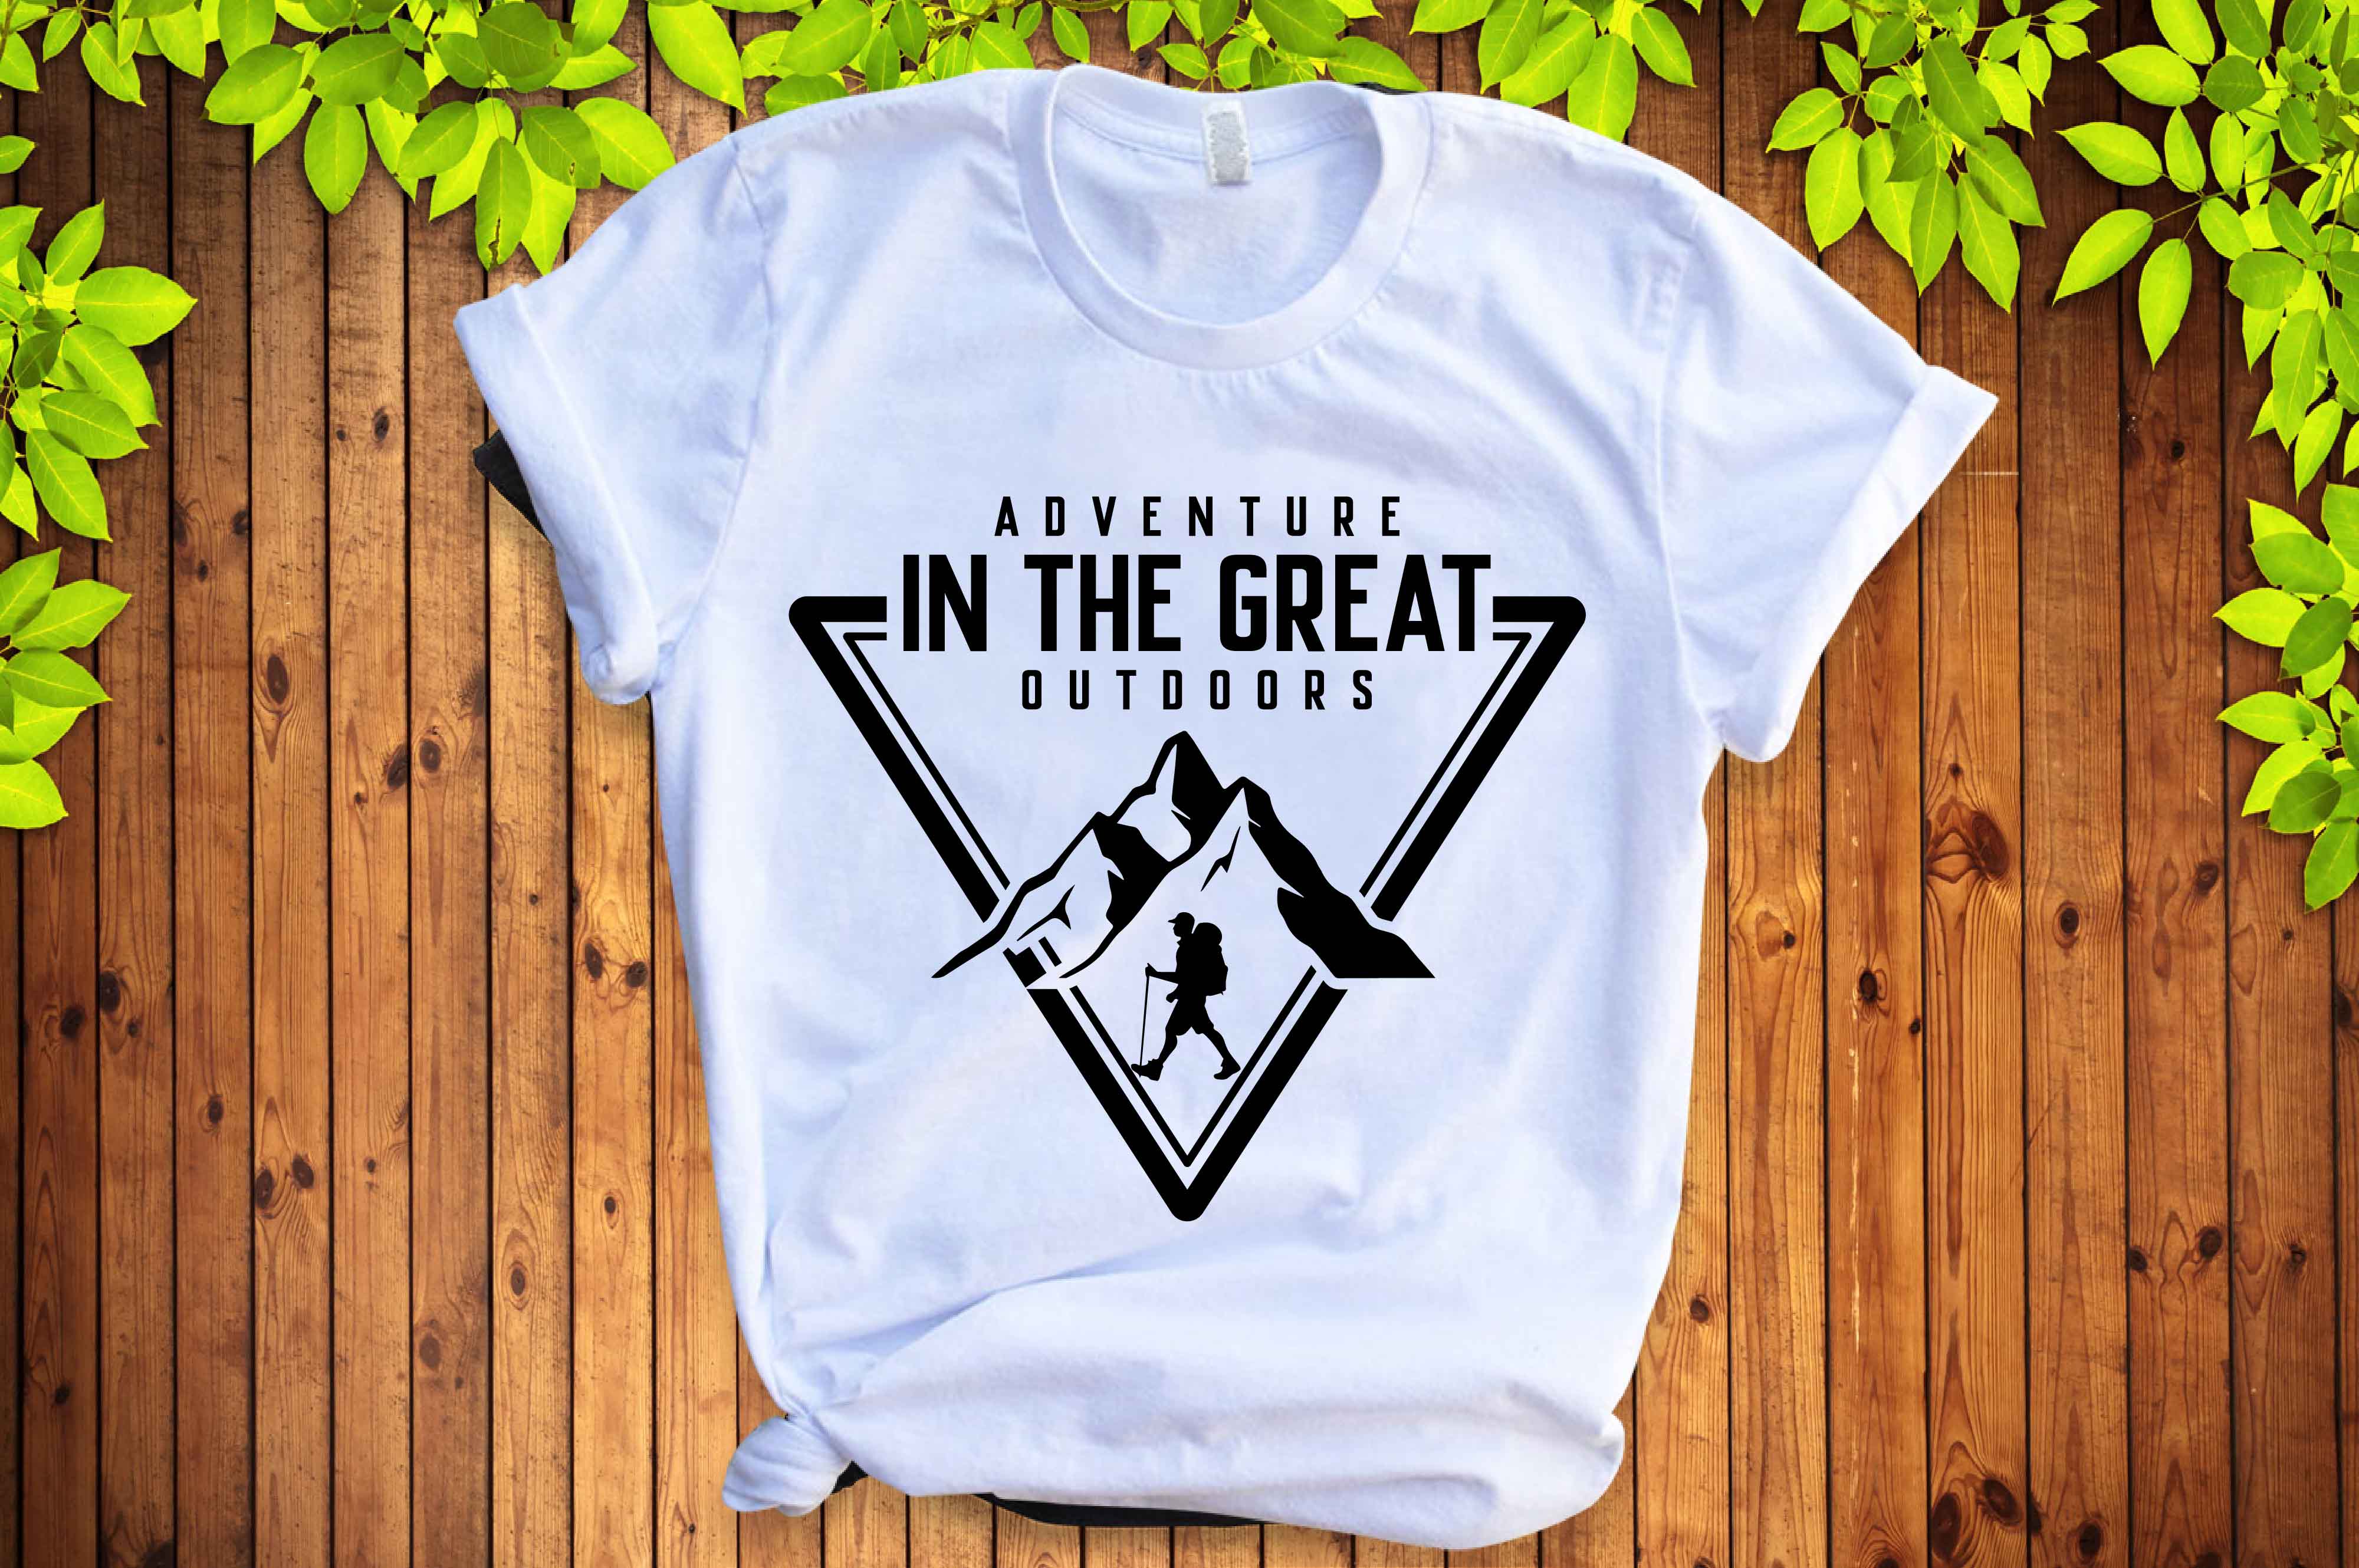 T - shirt that says adventure in the great outdoors.